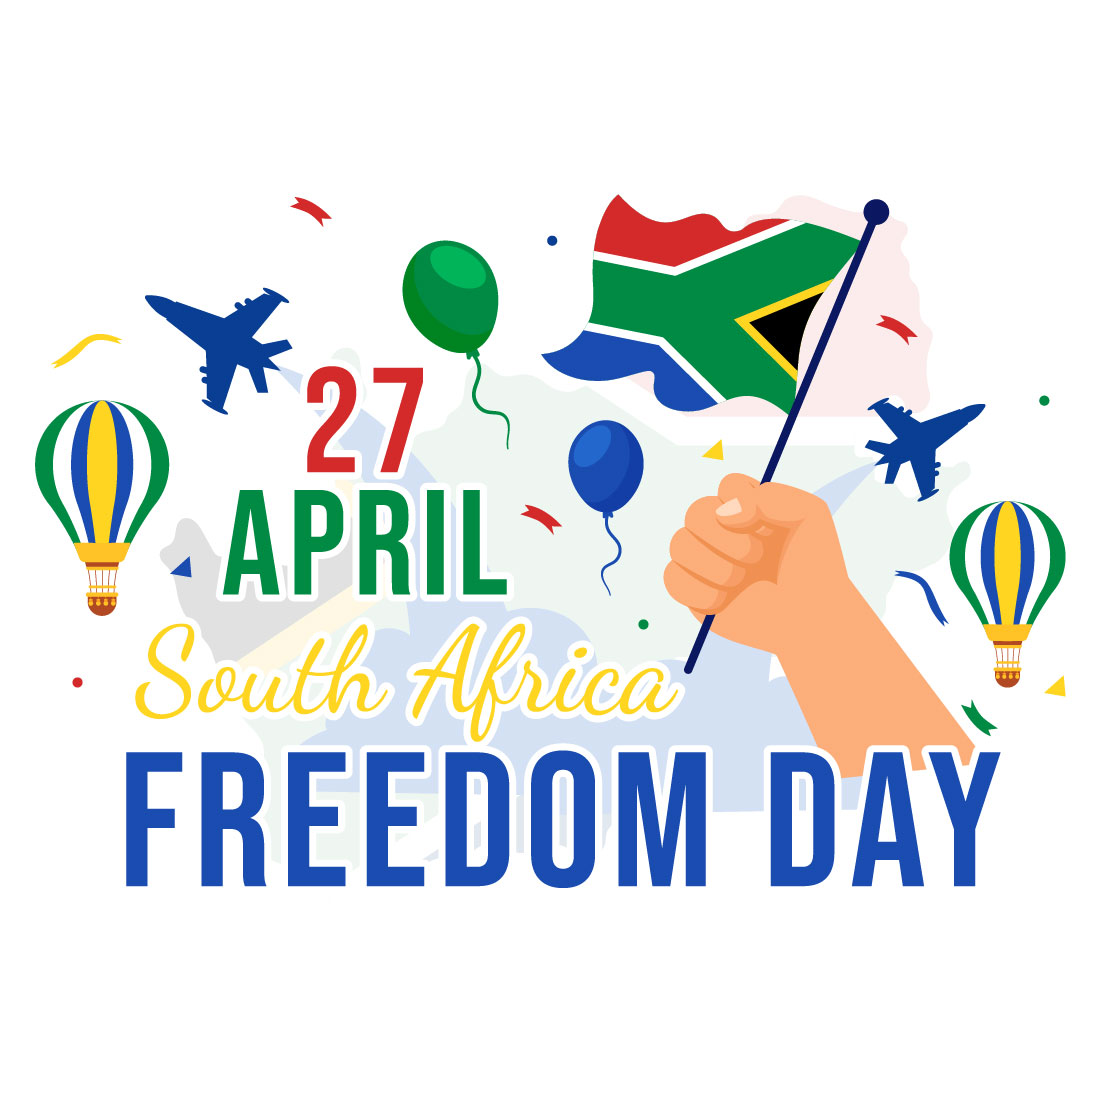 12 South Africa Freedom Day Illustration cover image.